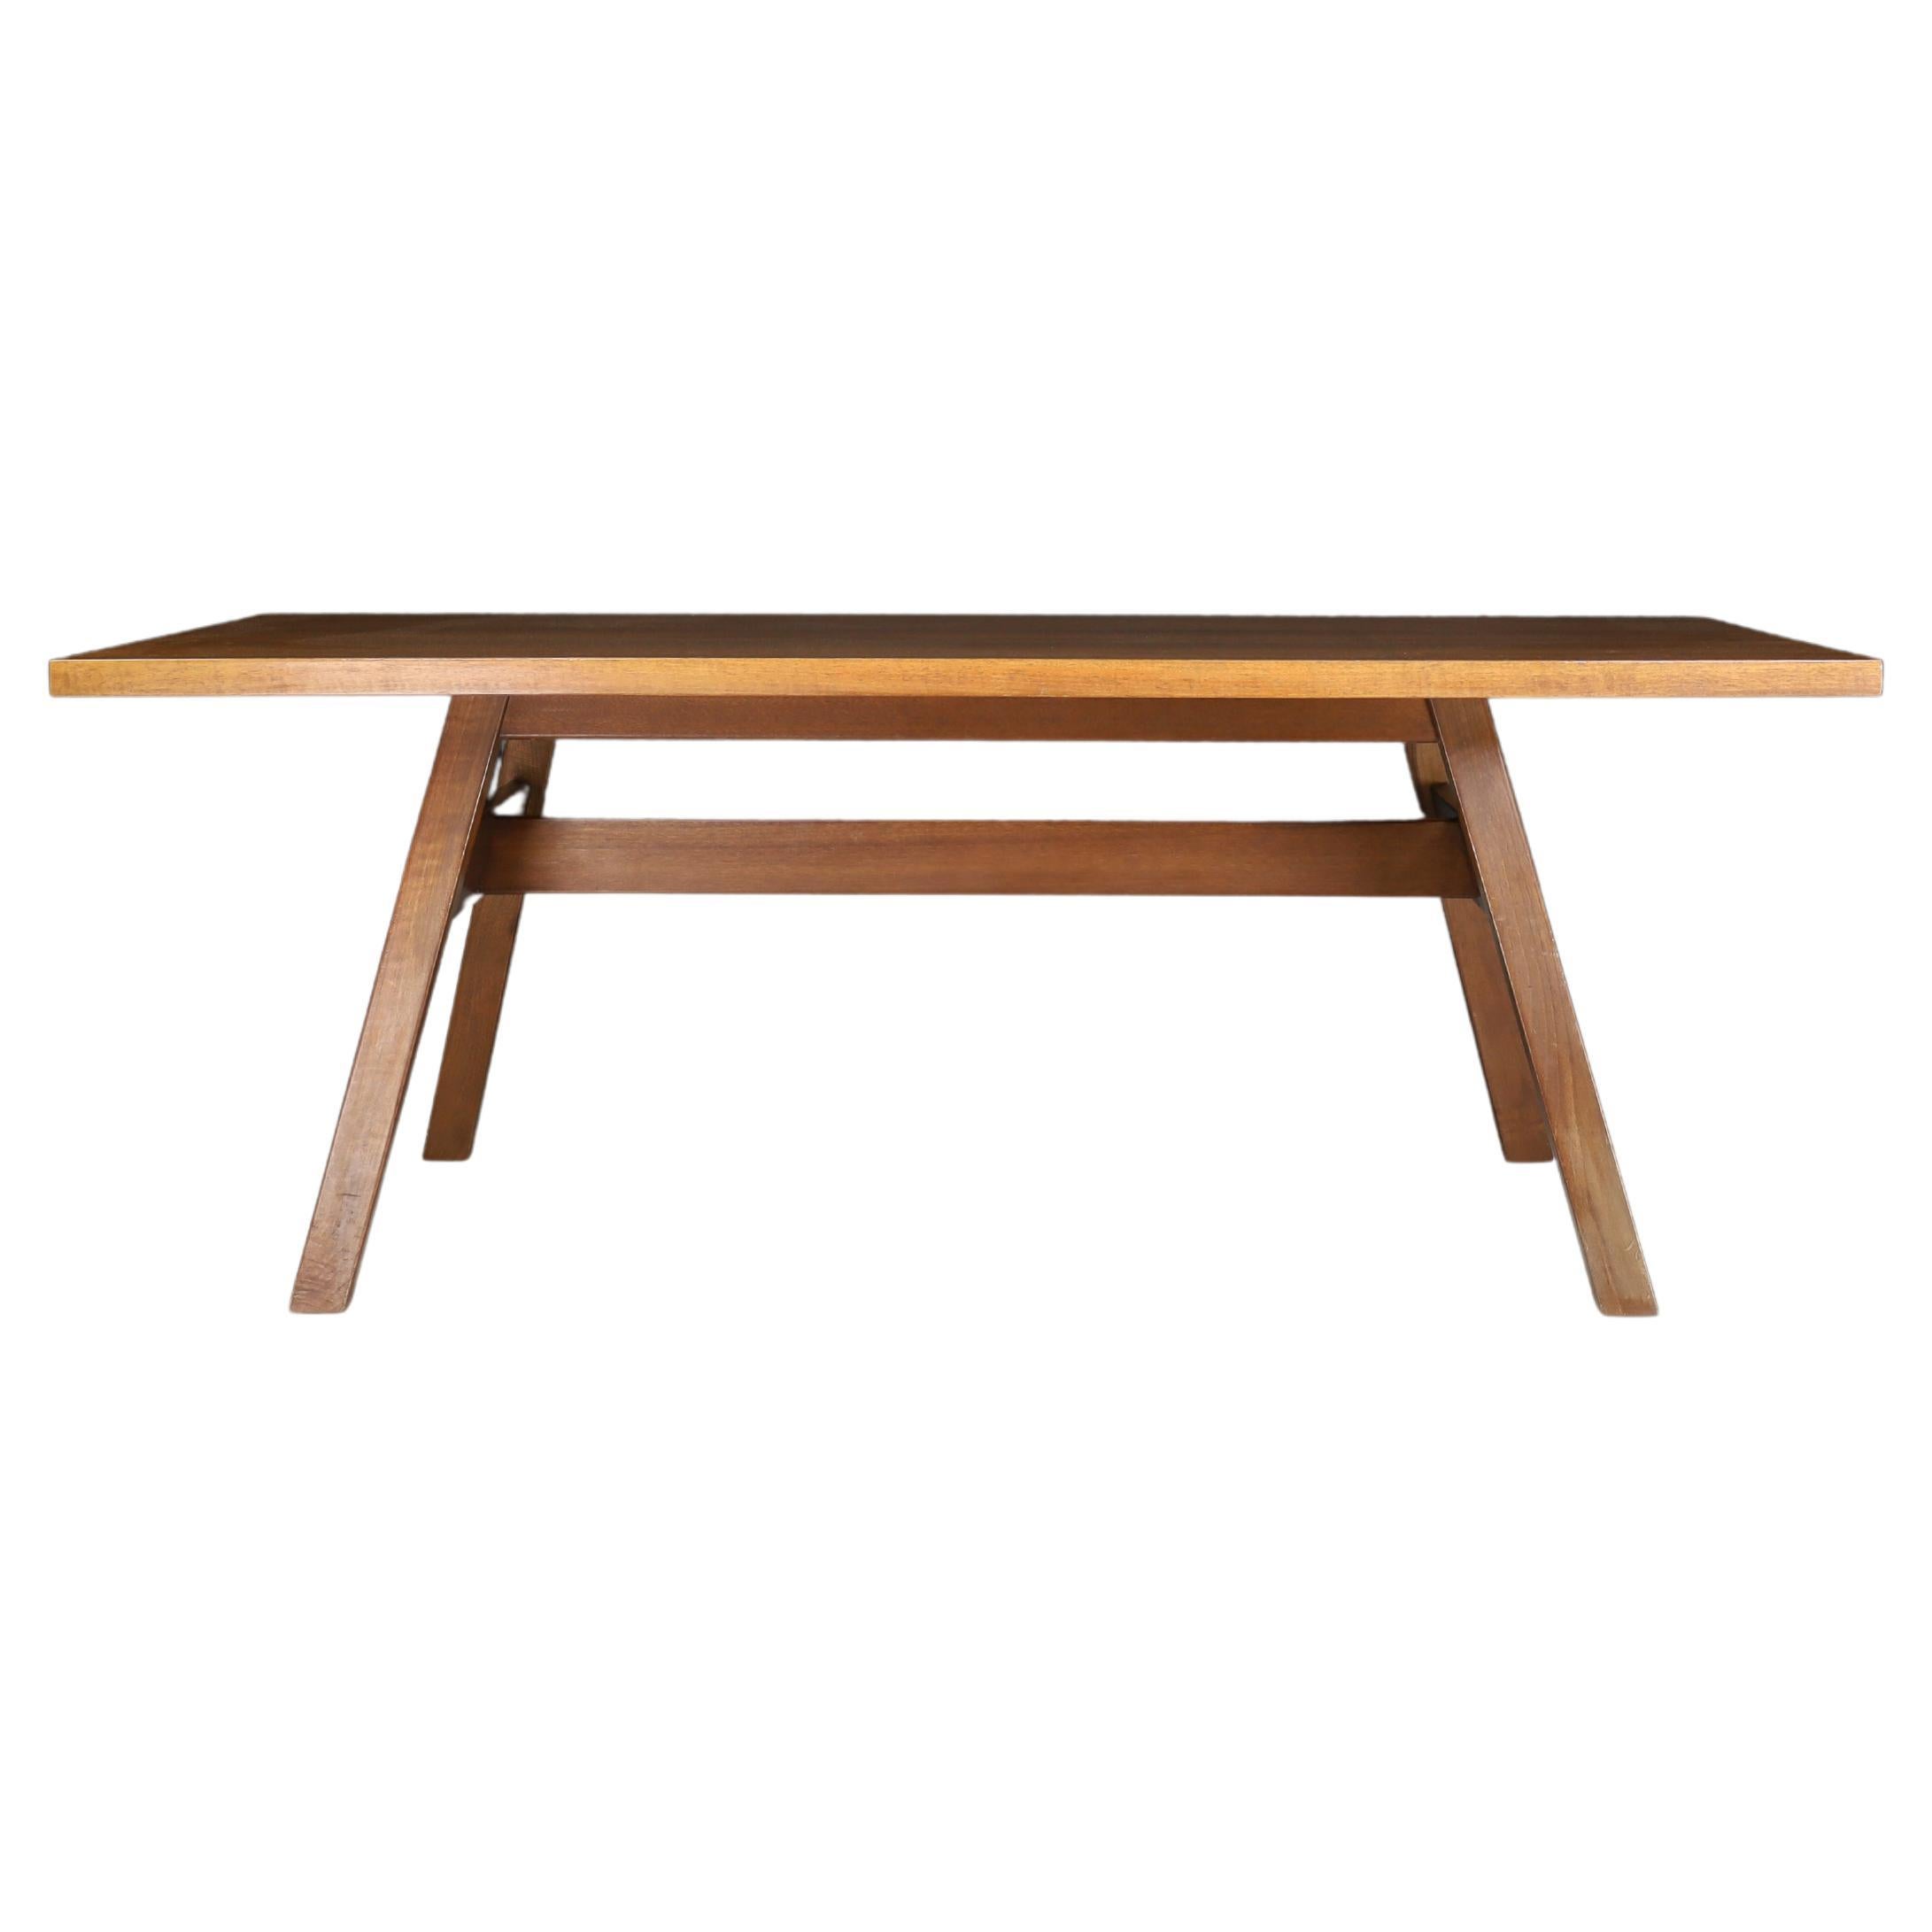 Giovanni Michelucci Walnut Dining Room Table for Poltronova, Italy, 1964 For Sale